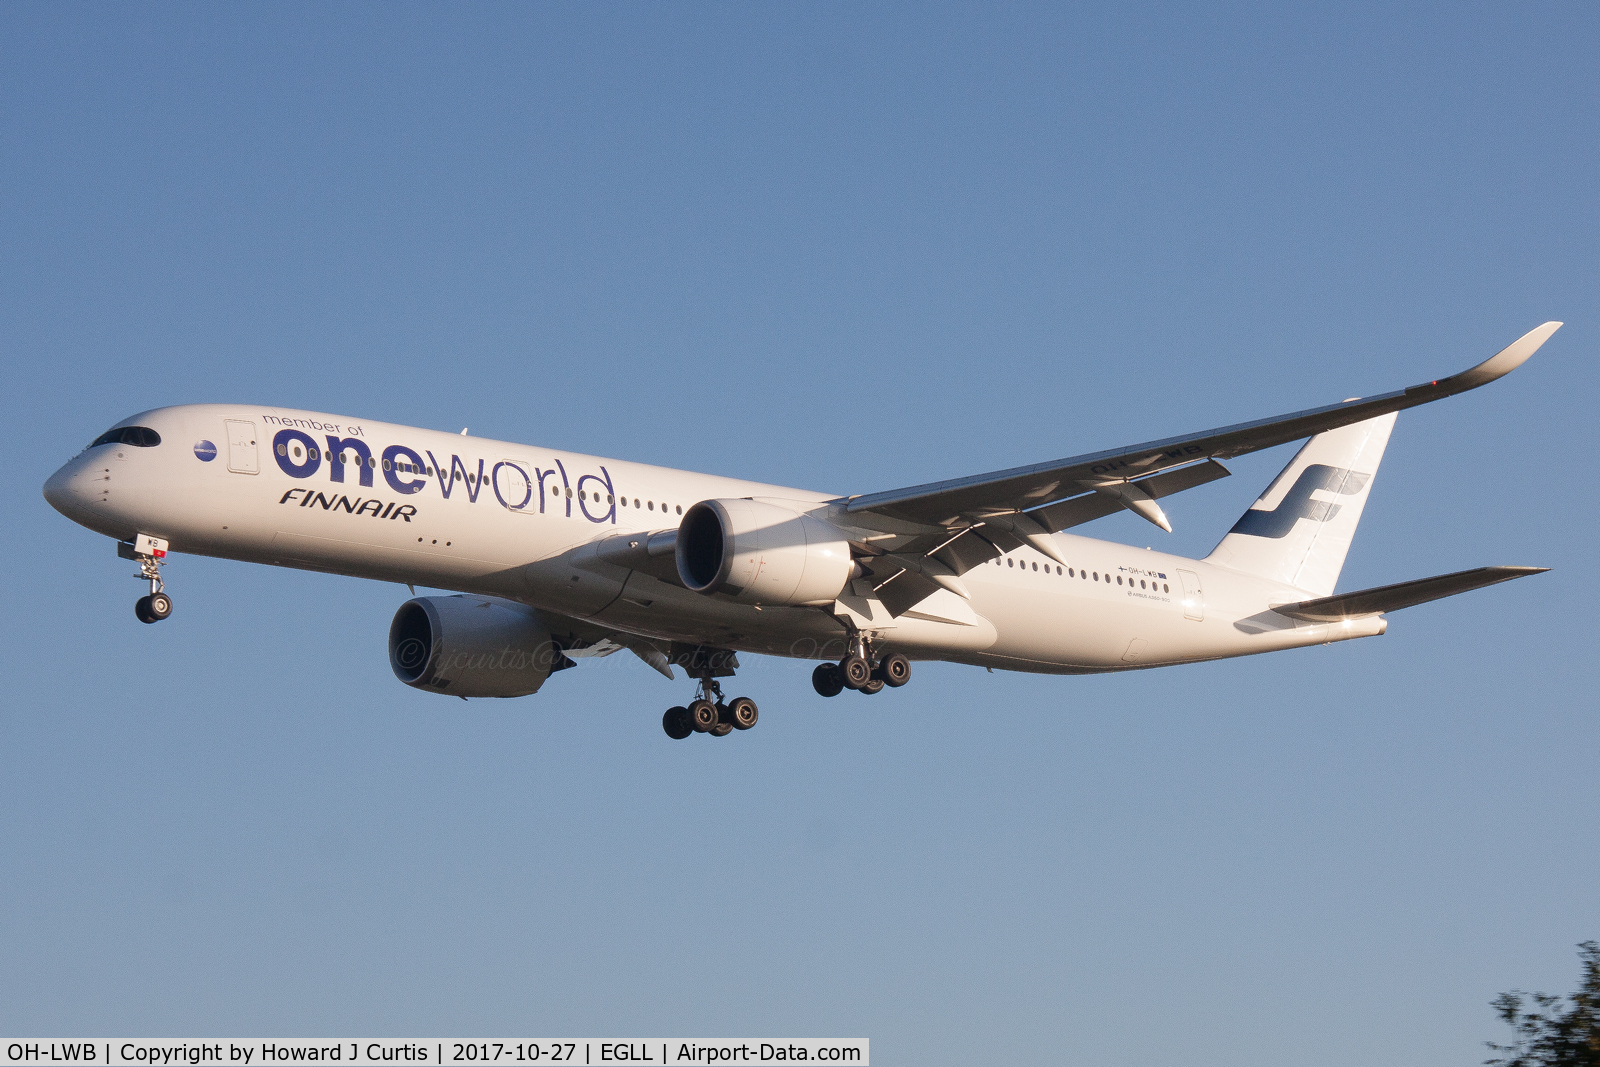 OH-LWB, 2015 Airbus A350-941 C/N 019, On finals.